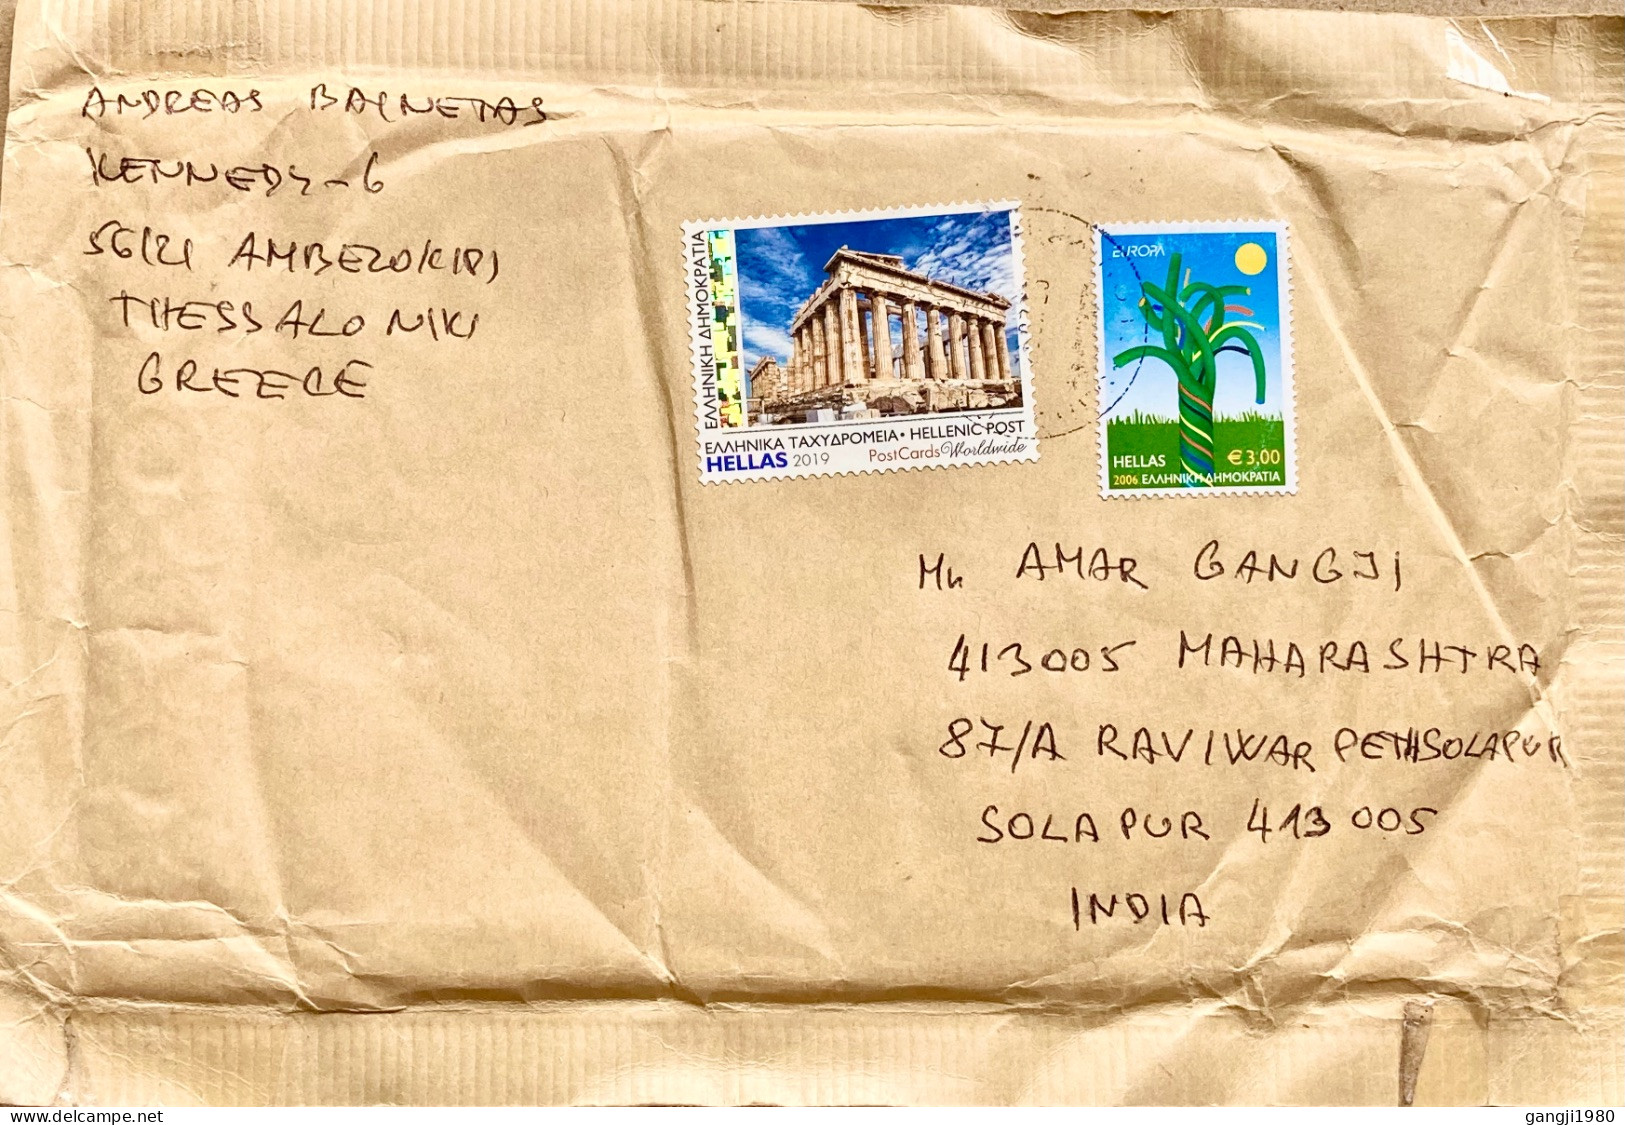 GREECE 2023, COVER USED INDIA, 2006 EUROPA, 2019 ARCHITECTURE, HERITAGE, STAMP FOR POSTCARD USED ON COVER, THESSALONIKI - Lettres & Documents